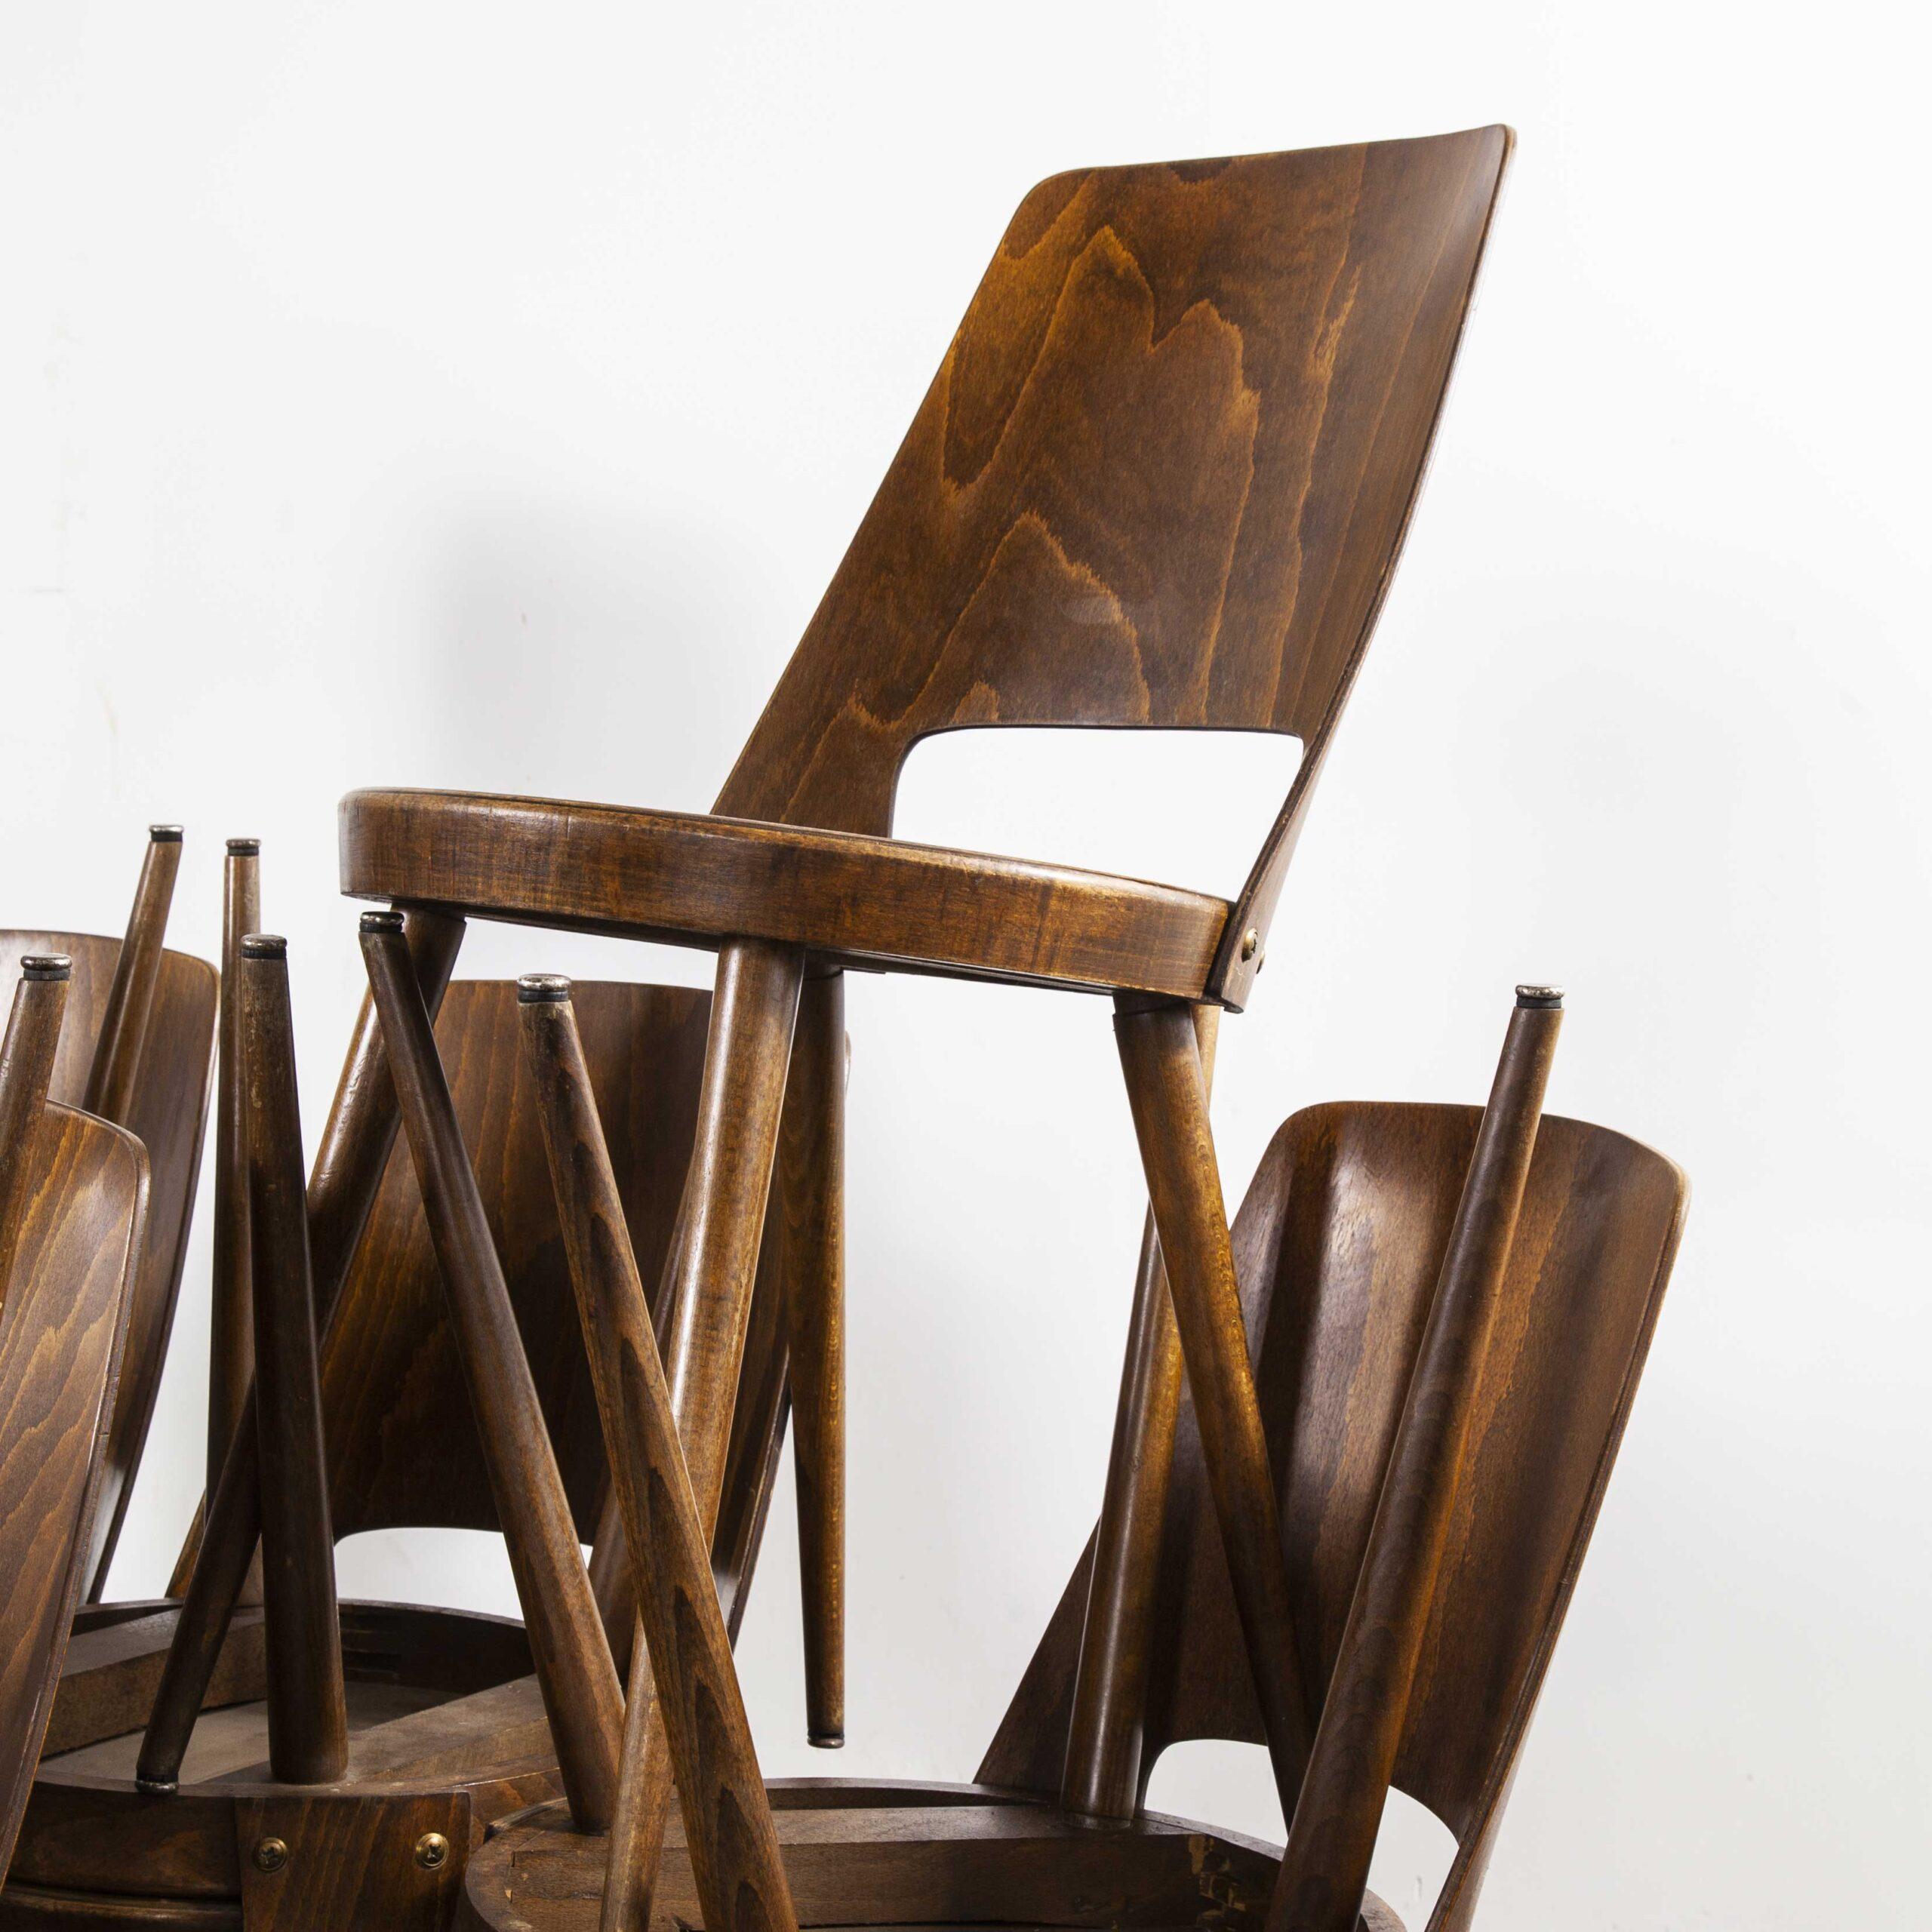 1960s French Baumann bentwood mondor dining chair, various quantities available. Classic beech bistro chair made in France by the maker Joamin Baumann. Baumann is a slightly off the radar French producer just starting to gain traction in the market.